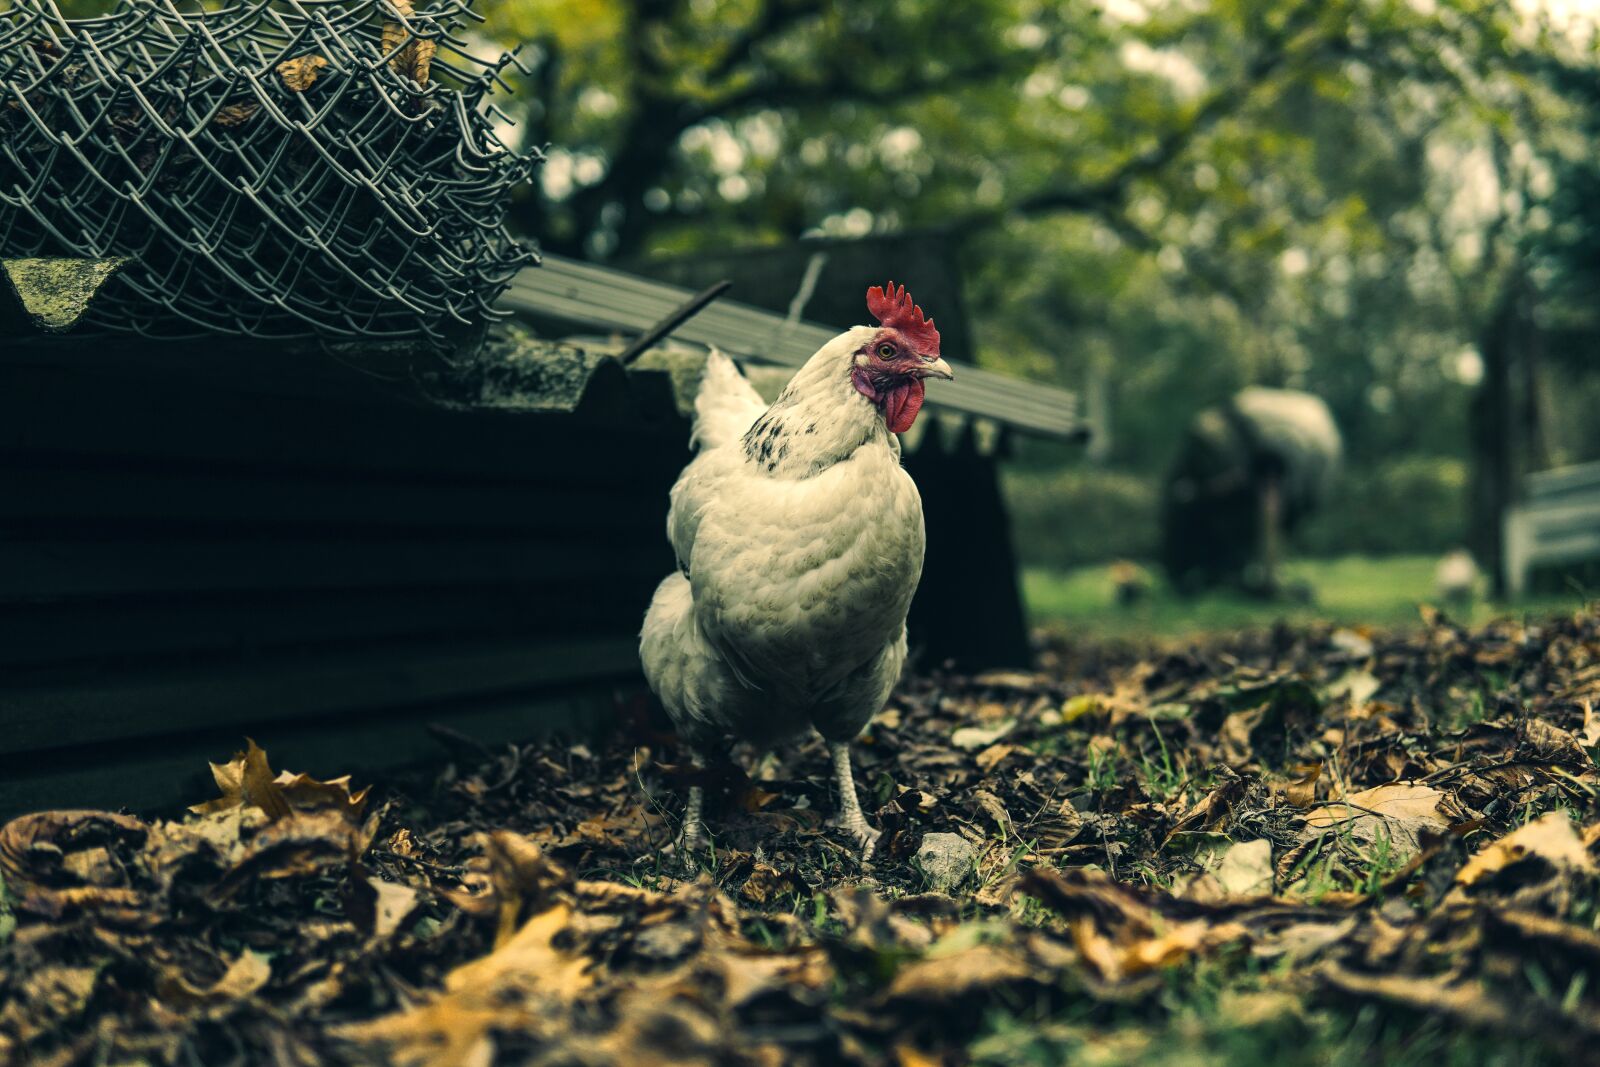 Sony a6500 sample photo. The hen, eggs, animals photography